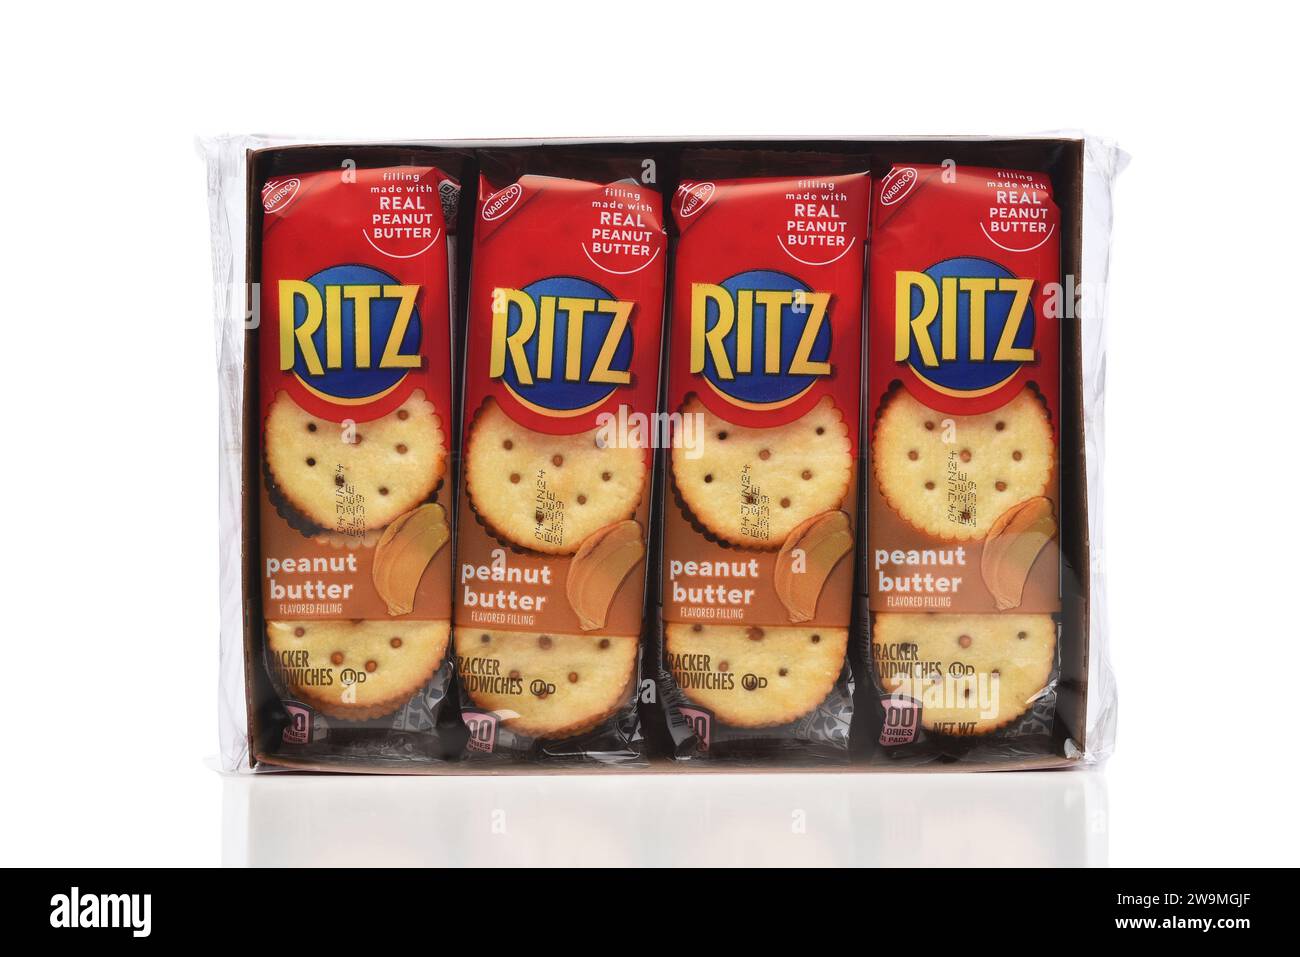 IRVINE, CALIFORNIA - 28 DEC 2023: A package of Ritz Peanut Butter Cracker Sandwiches, from Nabisco. Stock Photo